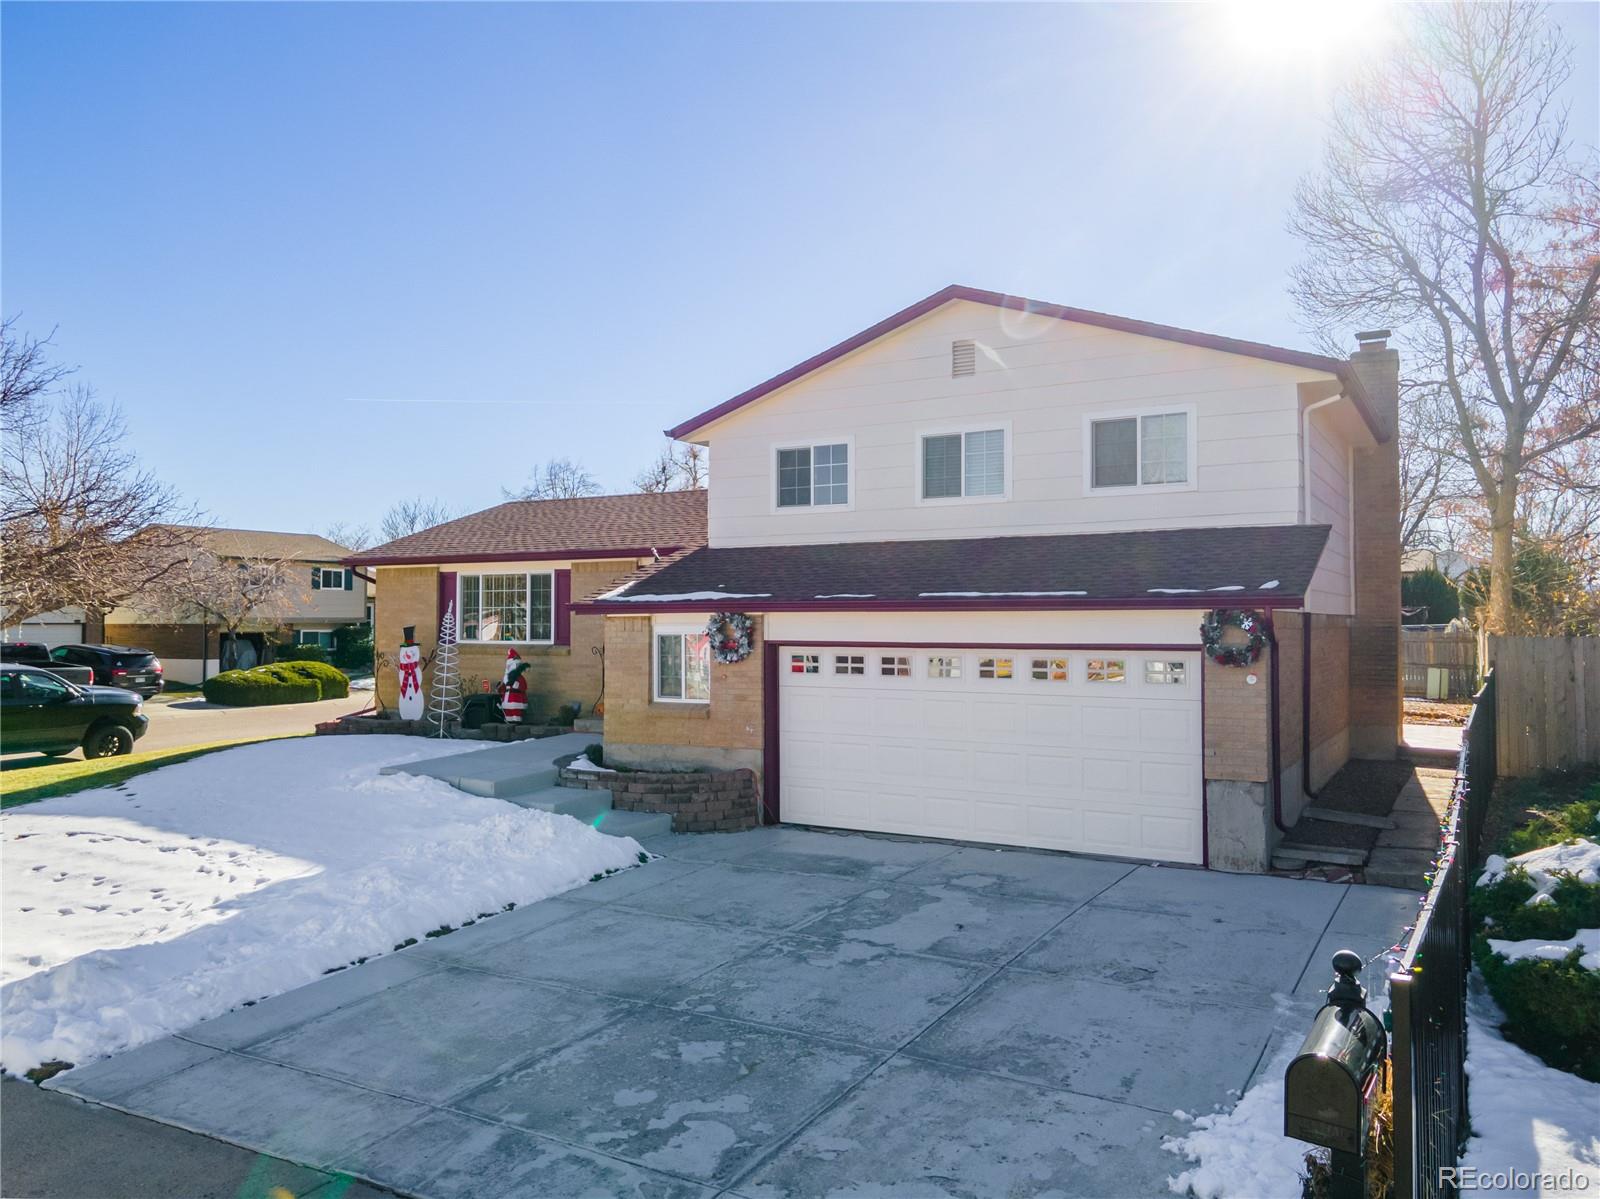 Report Image for 8908 W Maplewood Drive,Littleton, Colorado